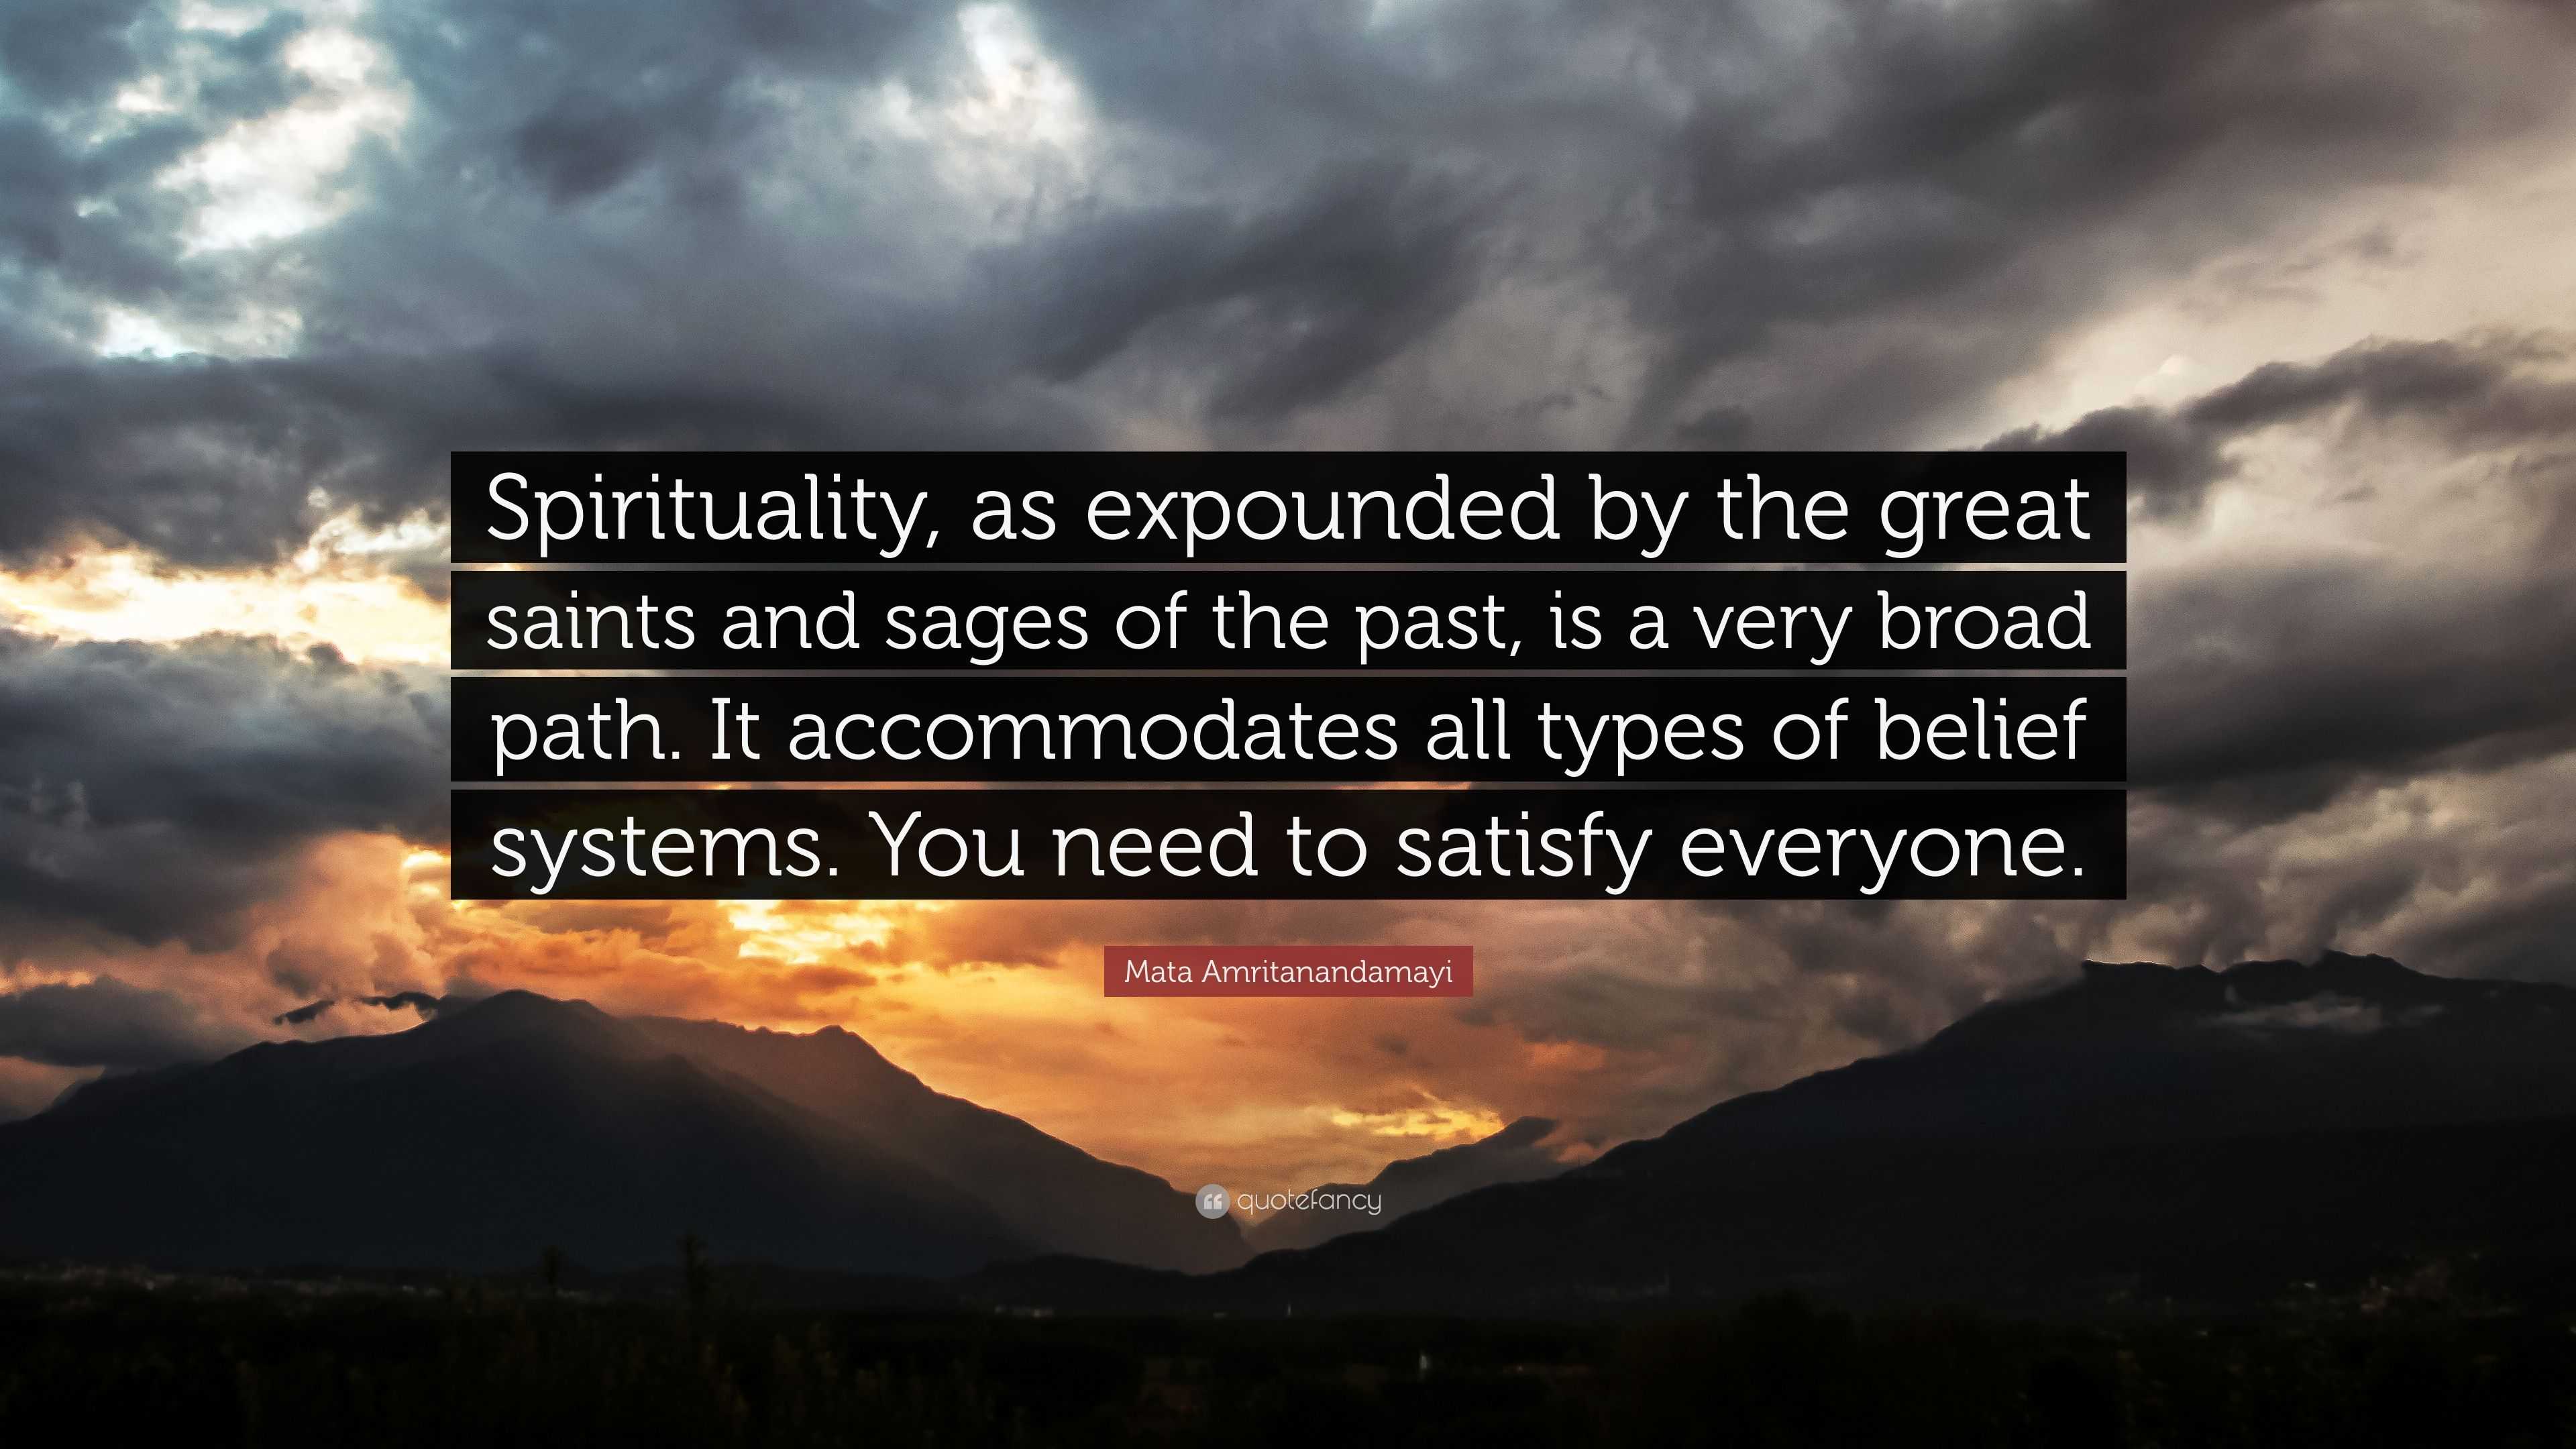 Mata Amritanandamayi Quote: “Spirituality, as expounded by the great ...